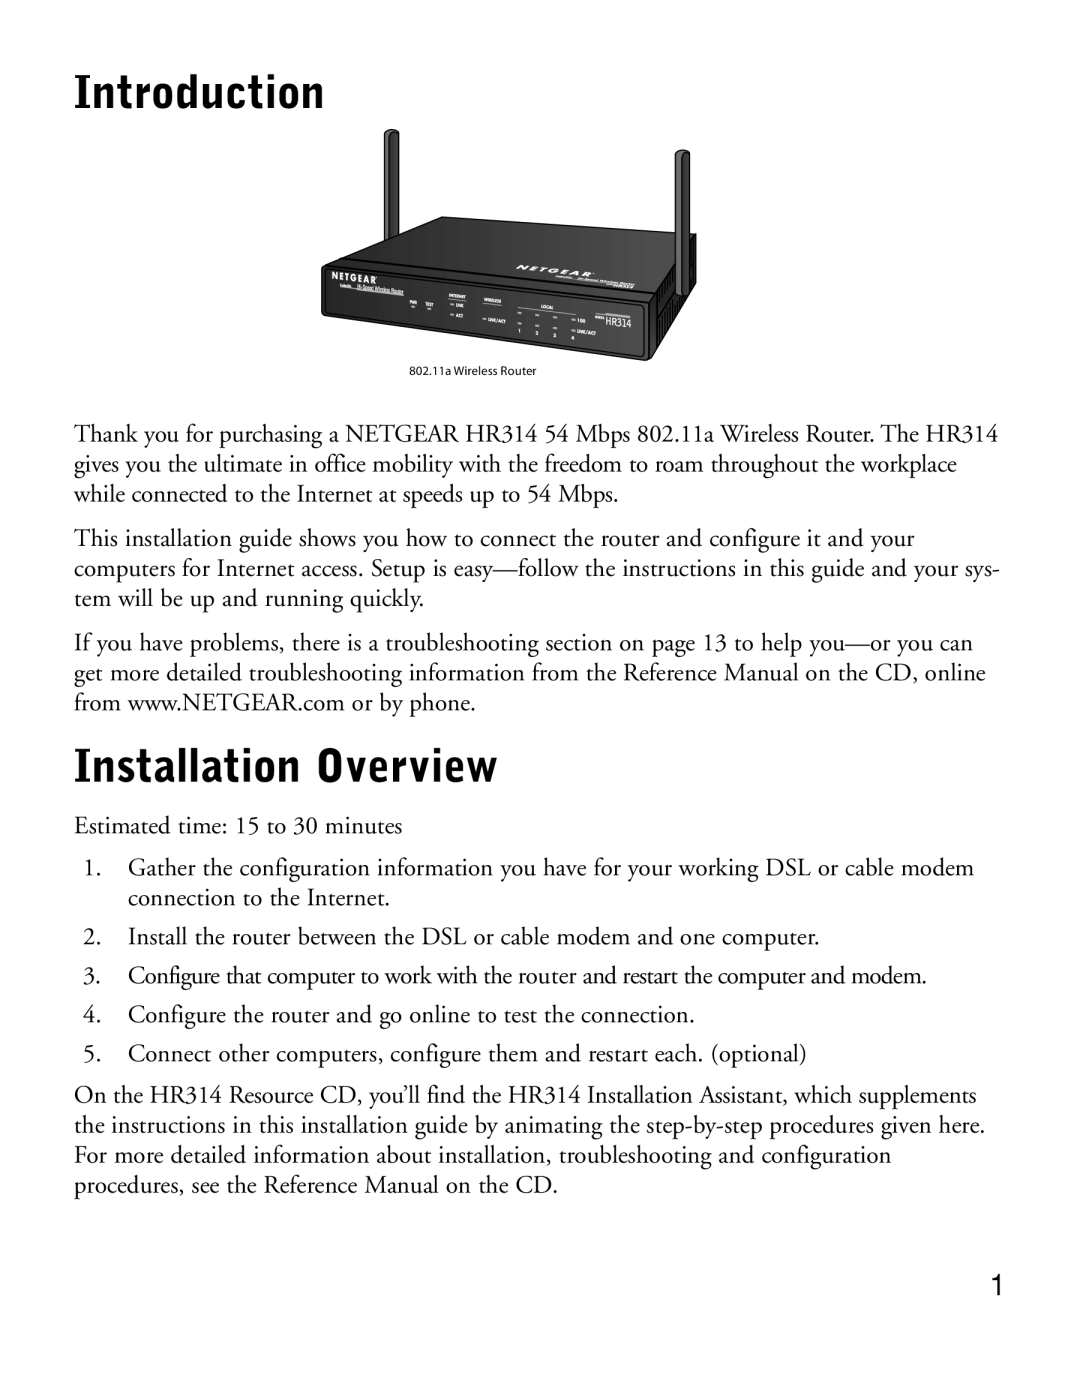 NETGEAR HR314 manual Introduction, Installation Overview 